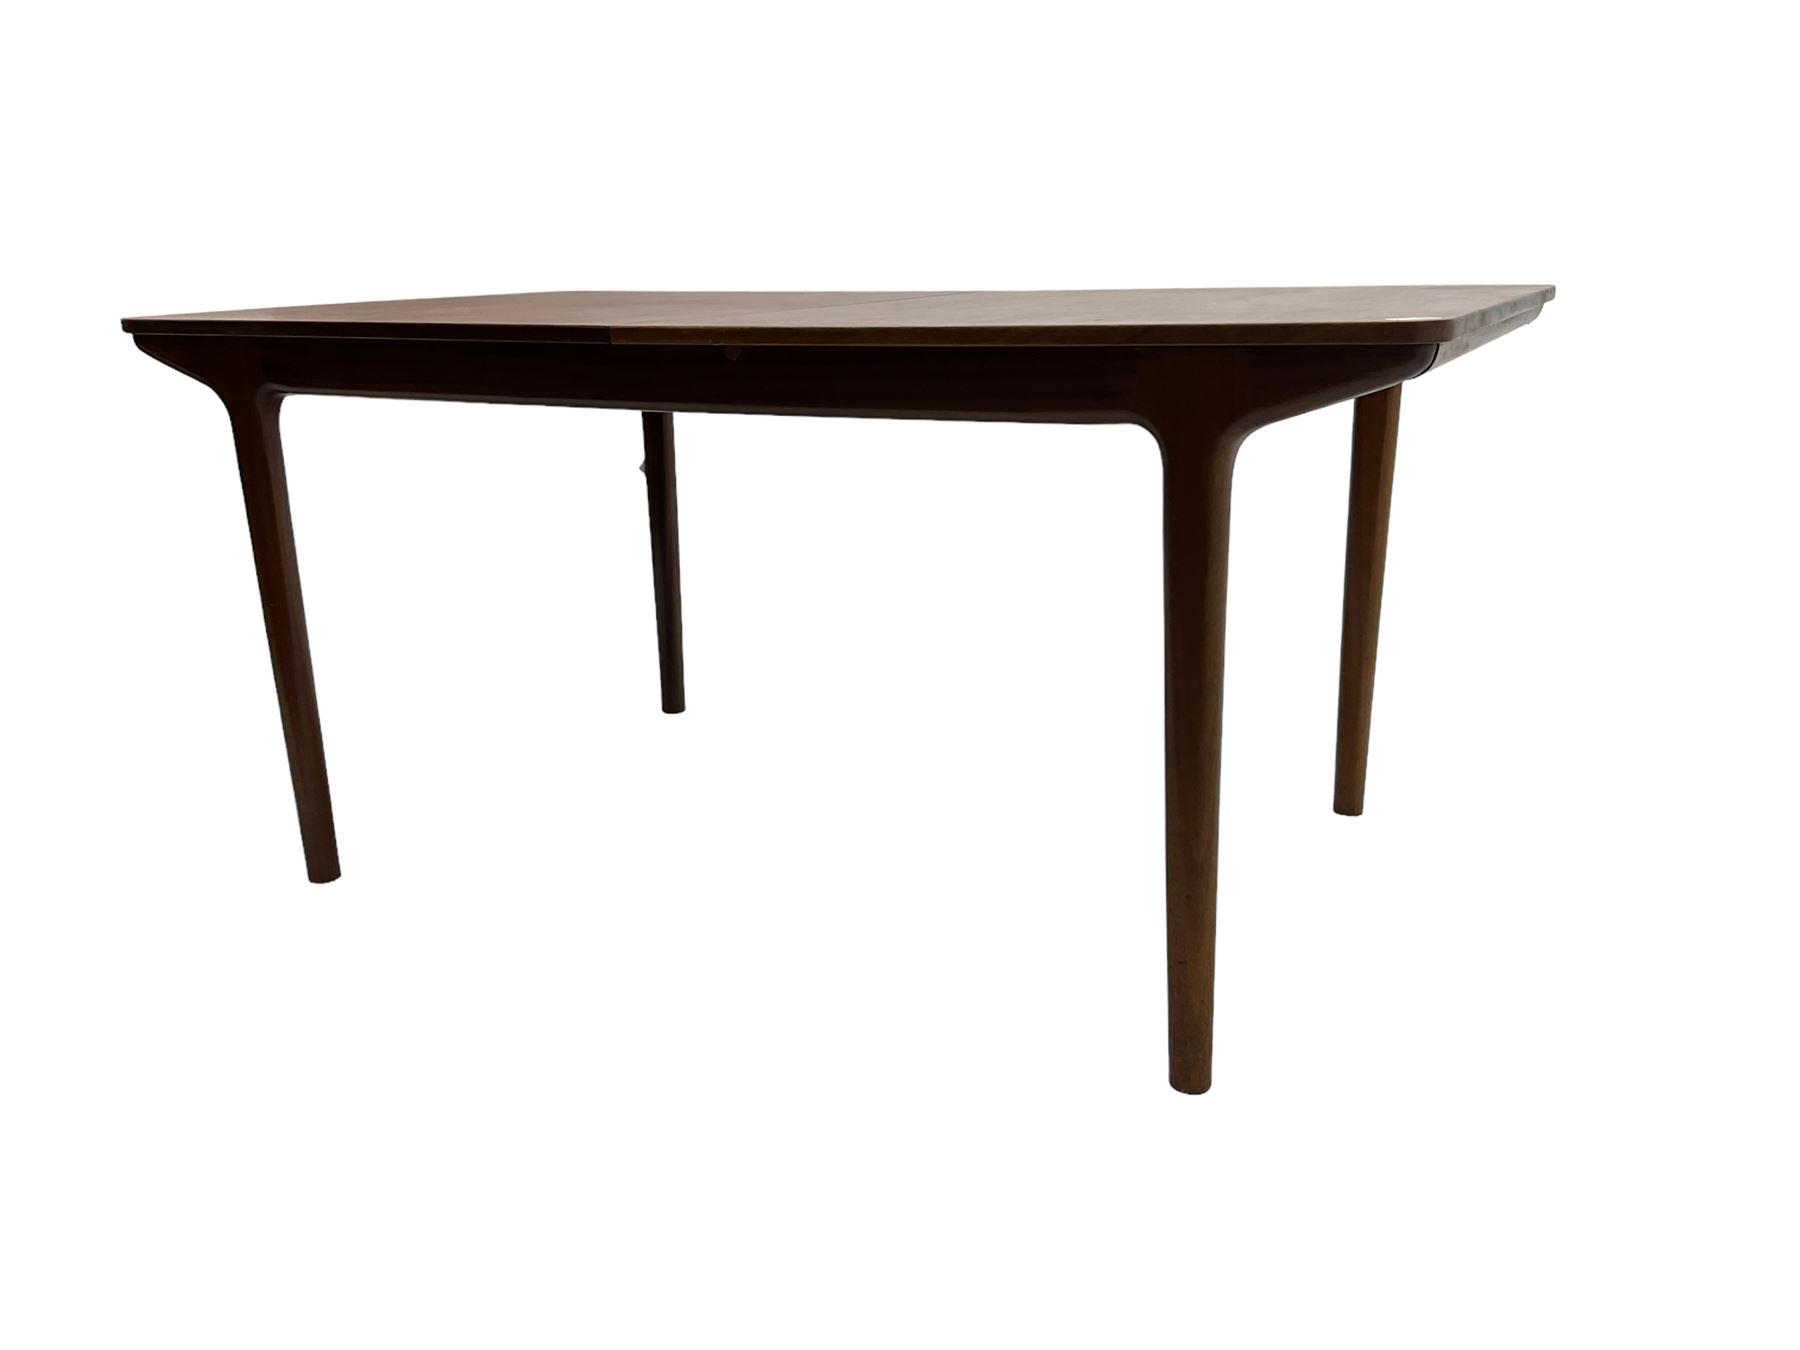 Tom Robertson for AH McIntosh & Co of Kirkaldy - mid-20th century teak extending dining table - Image 5 of 10